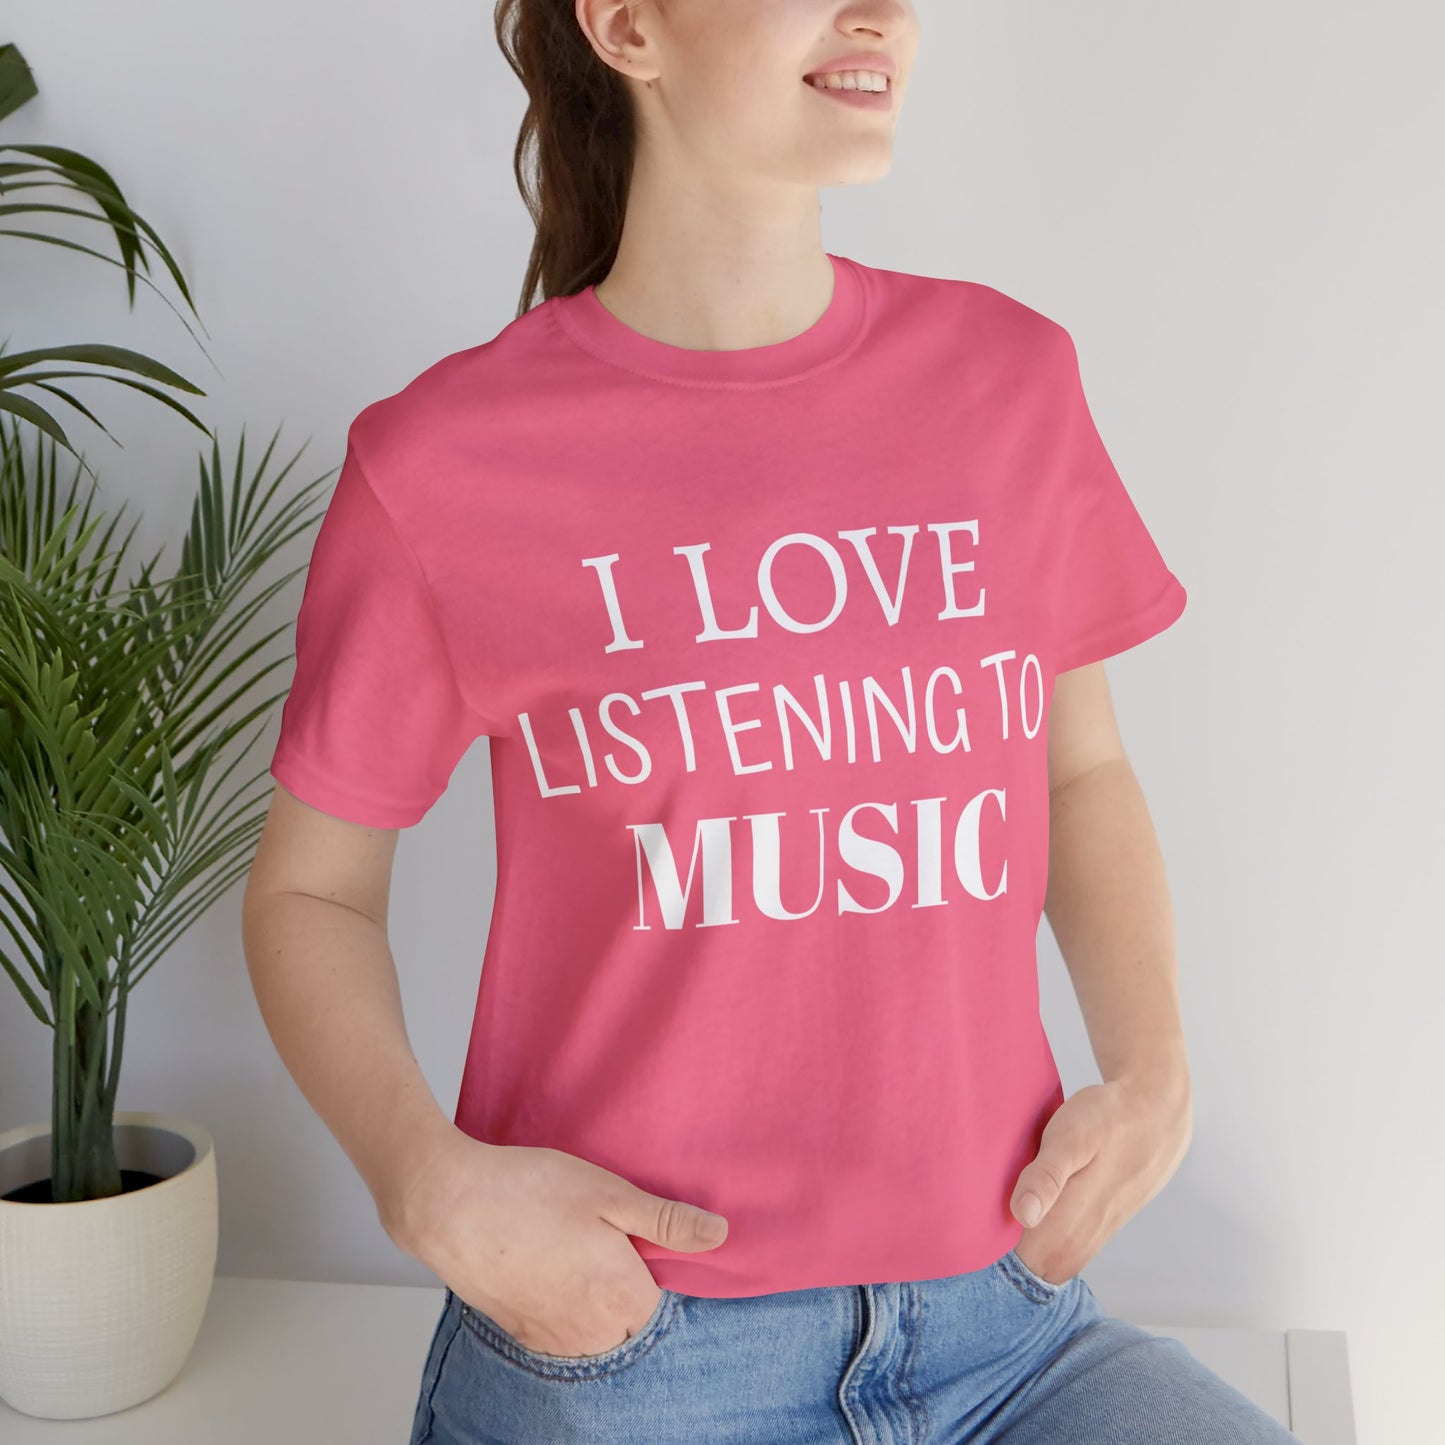 Concerts Cotton Crew neck Everyday Wear Gift for Music Lovers Jamming Sessions Made in USA Melodies Music Apparel Music Community Music Connection Music Conversations Music Enthusiast Music Inspiration Music Lover Music Passion Music Therapy Musical Spirit Musical Vibes Musician Fashion Petrova Designs Shop Now T-shirts Unisex